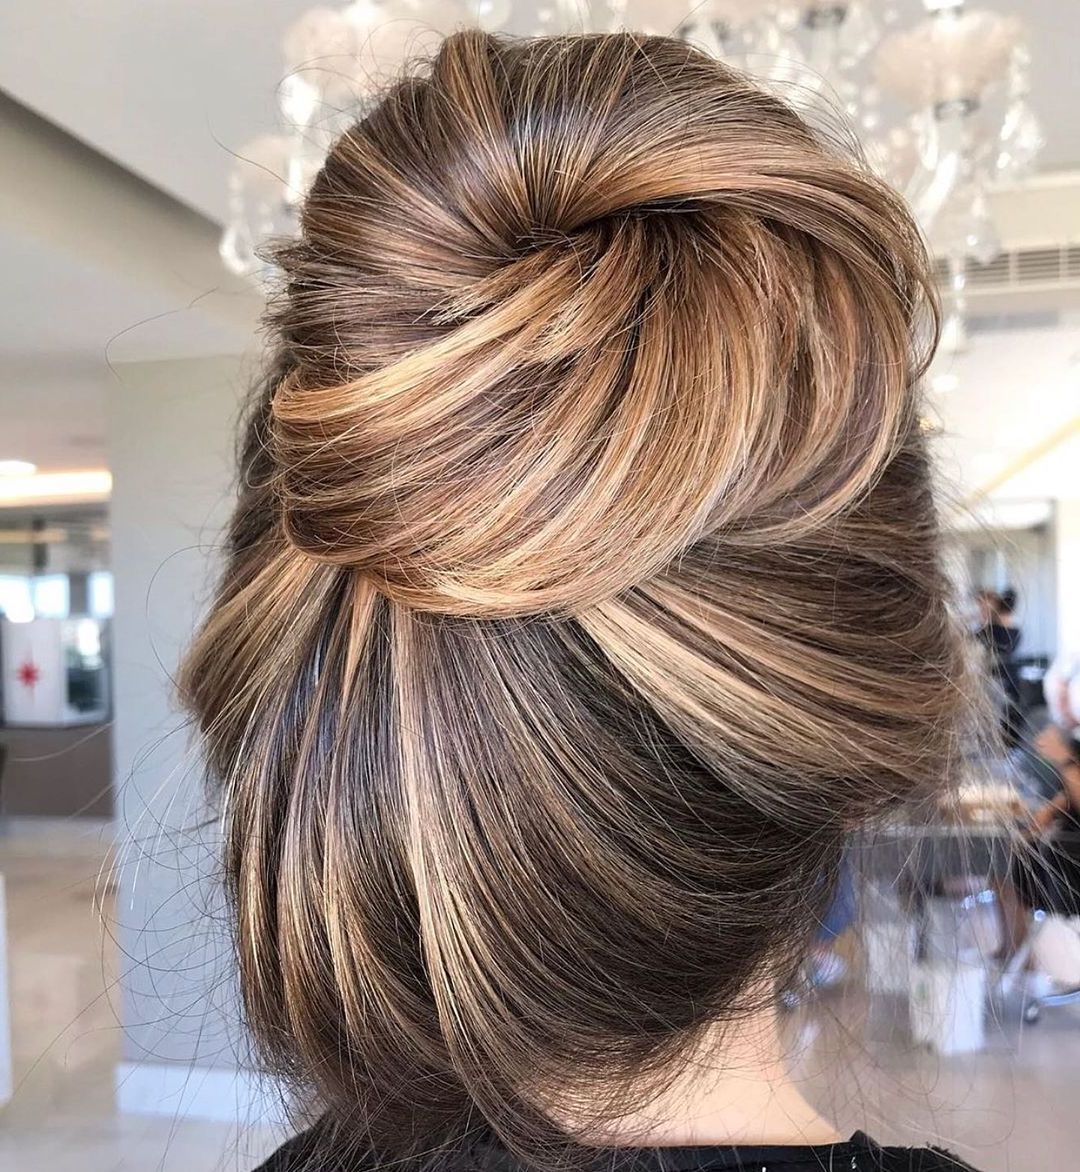 24 Messy Bun Hair Ideas That You Need To Try Out Inside Most Recent Messy Chignon With Highlights (View 6 of 15)